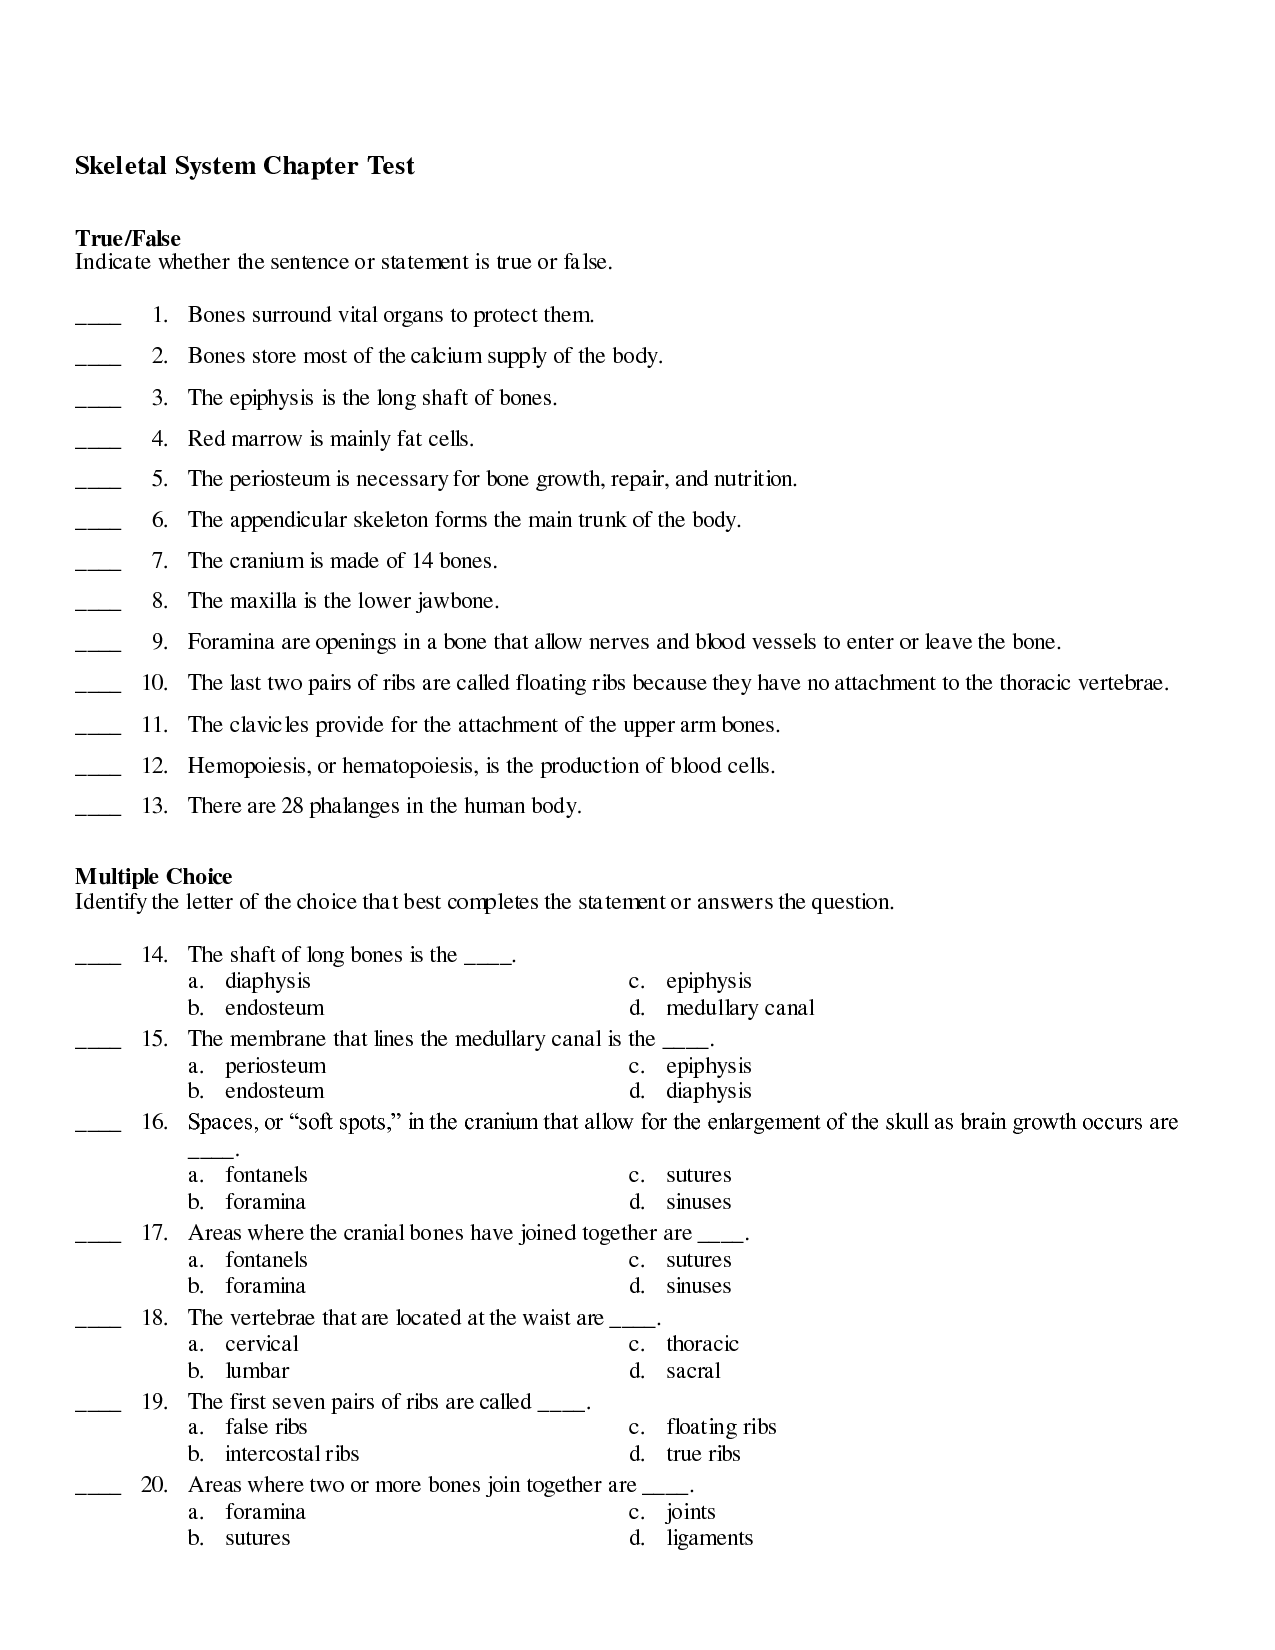 12-best-images-of-of-answers-forms-energy-similationworksheet-conservation-and-energy